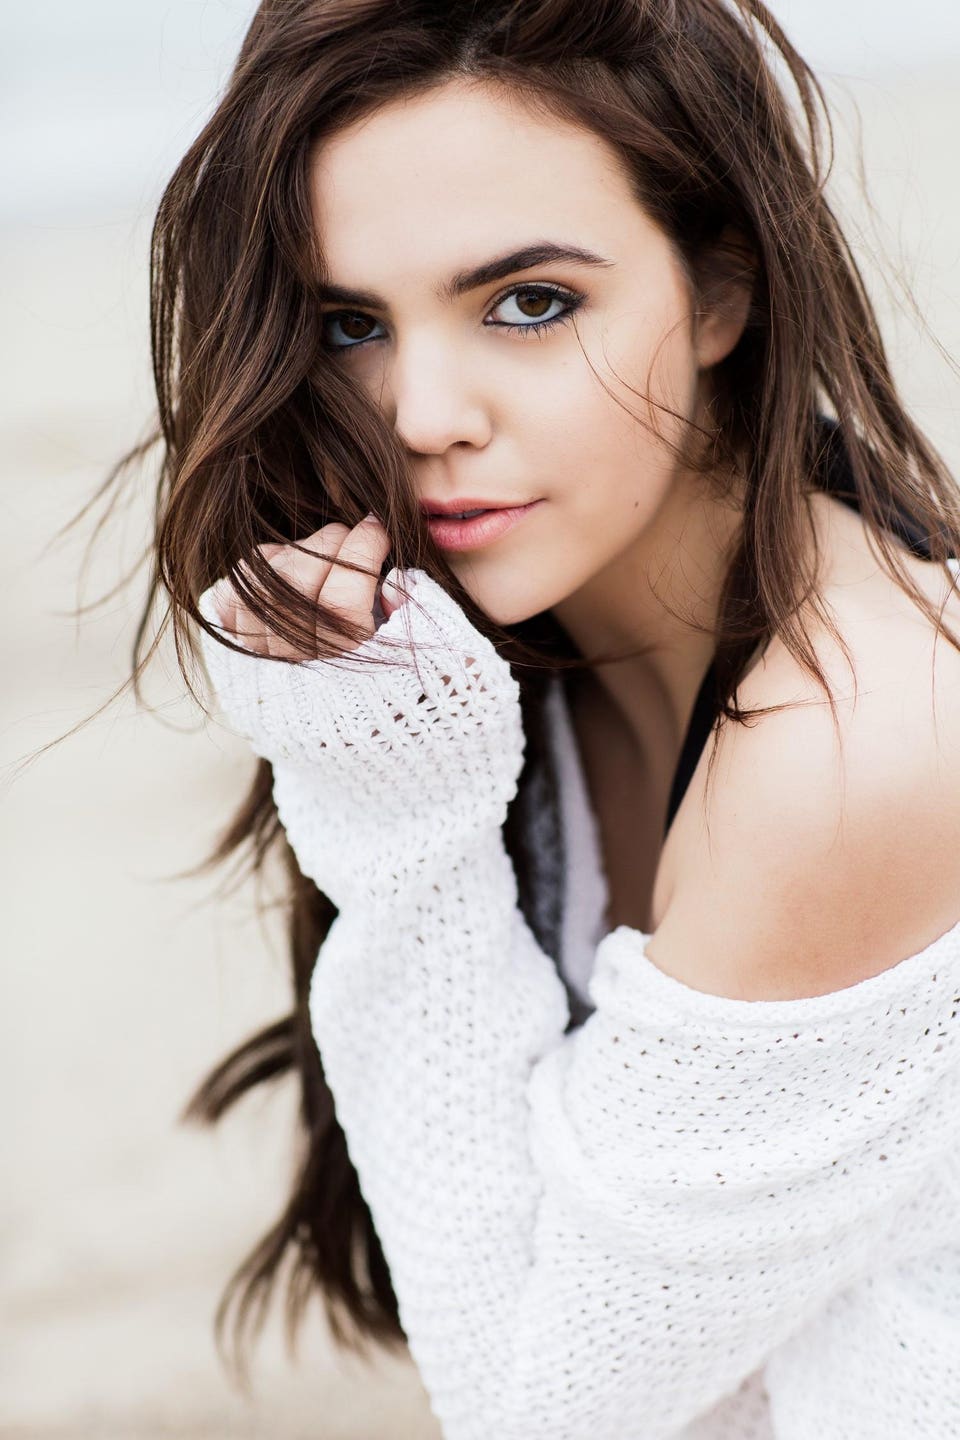 https%3A%2F%2Fblogs-images.forbes.com%2Fclairecoghlan%2Ffiles%2F2018%2F02%2FBailee-Madison-HS.jpg